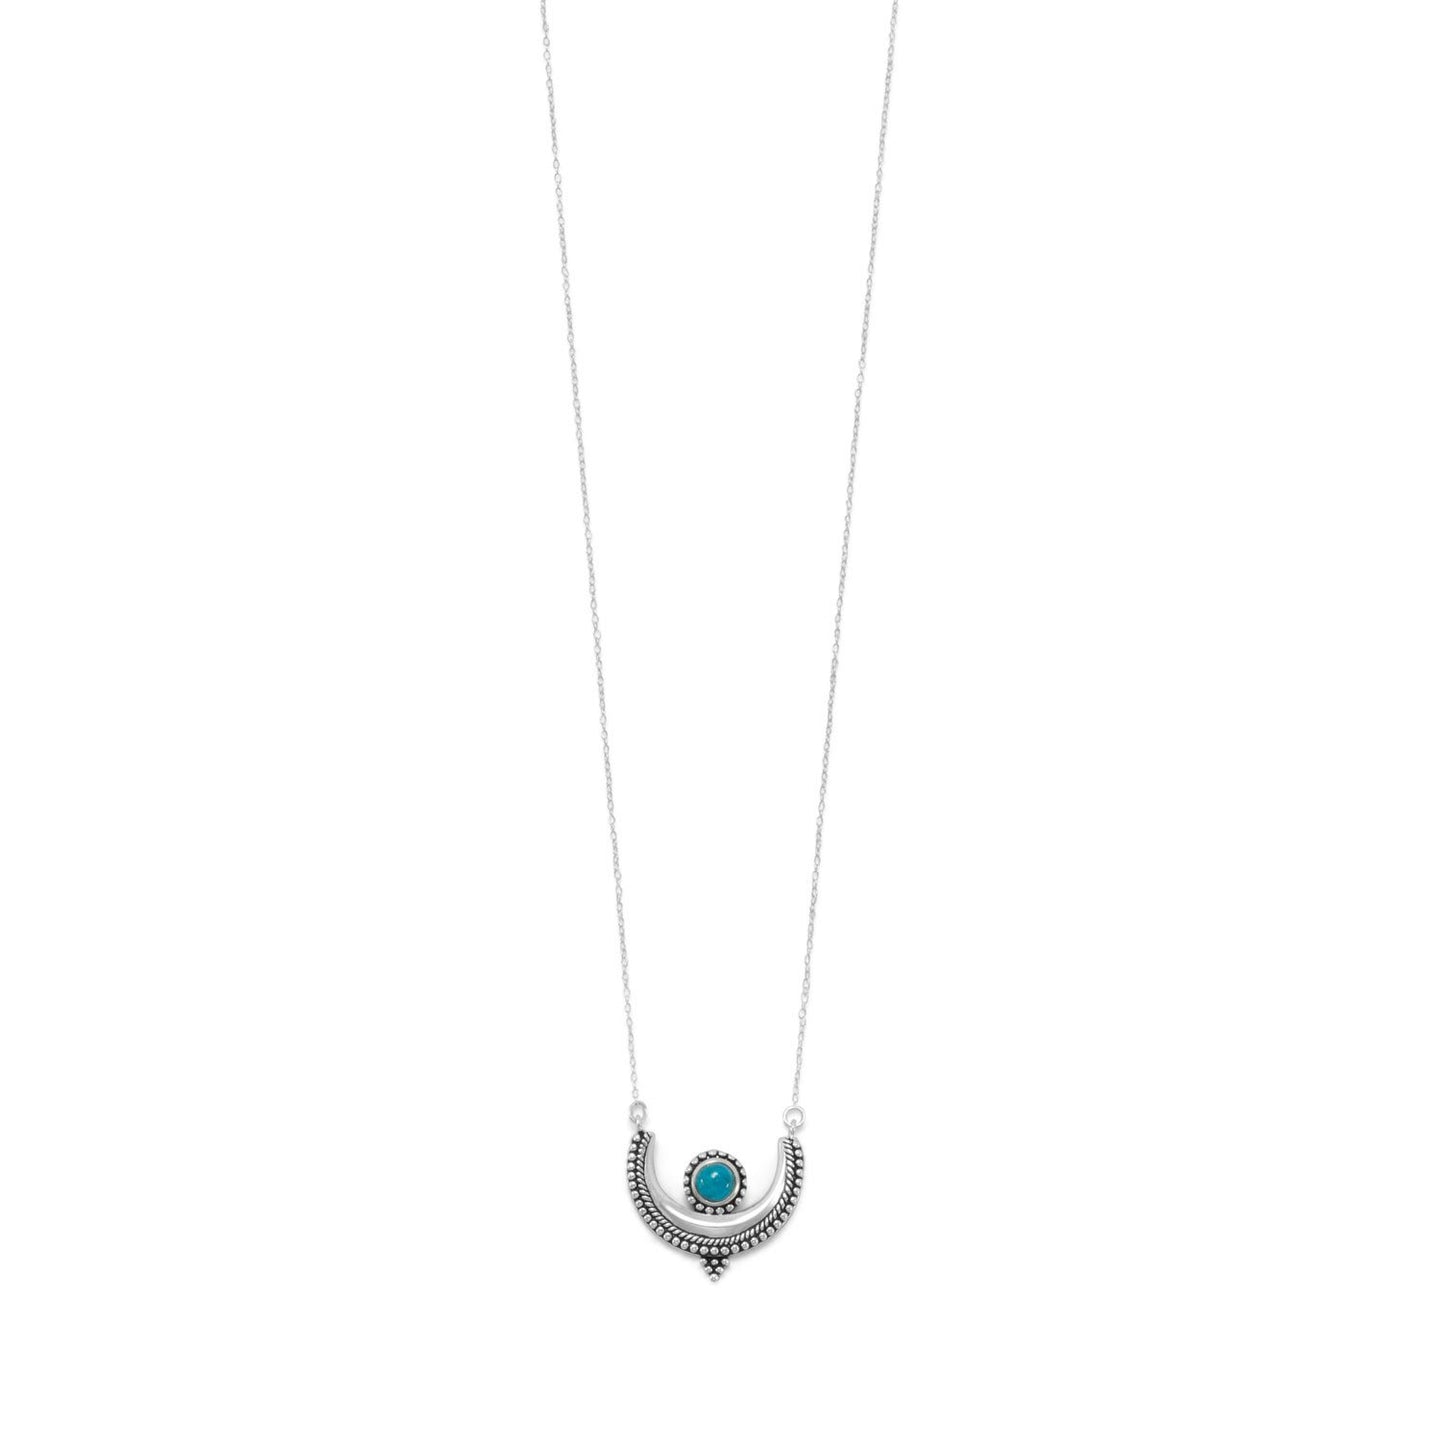 Oxidized Turquoise Crescent Necklace - SoMag2